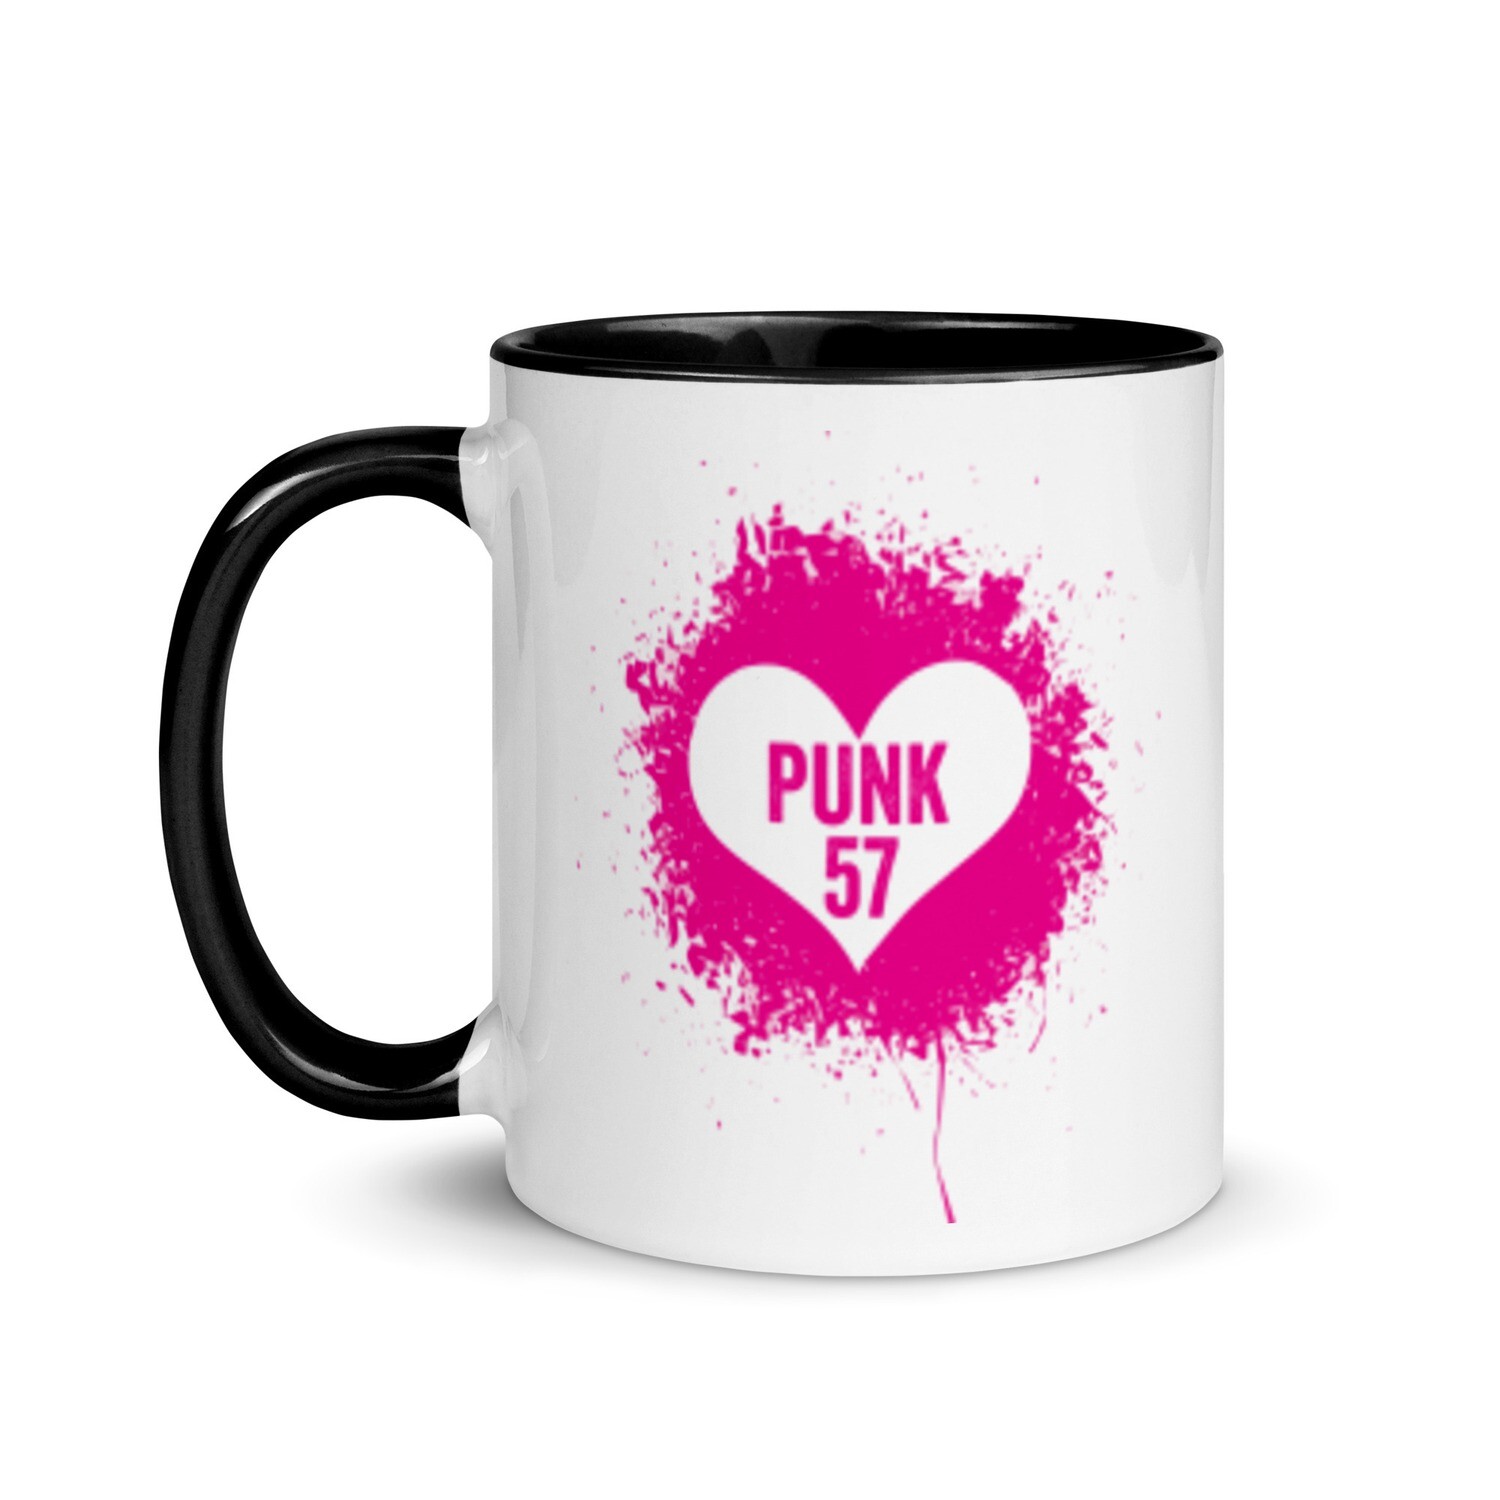 Punk 57 Quote Mug with Color Inside